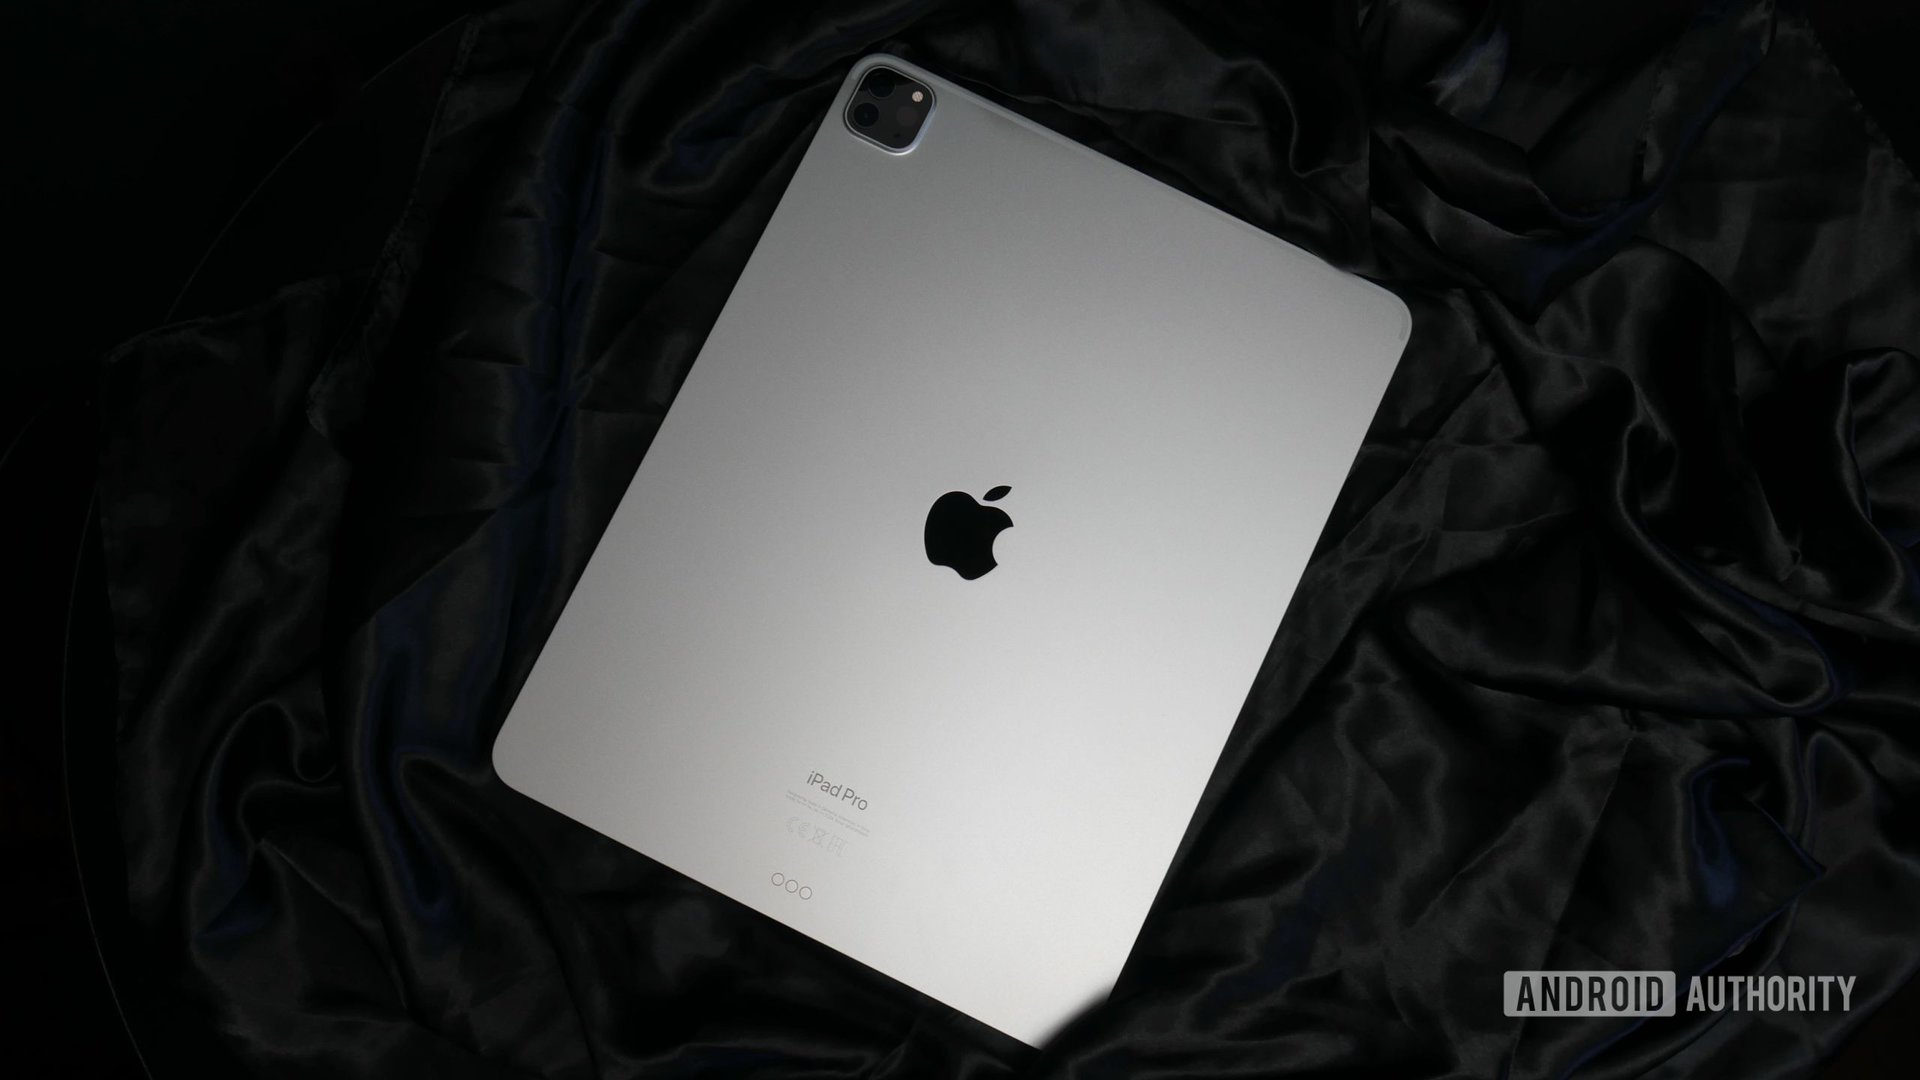 Apple iPad Pro (7th gen) rumors: Expected release date, feature wishlist